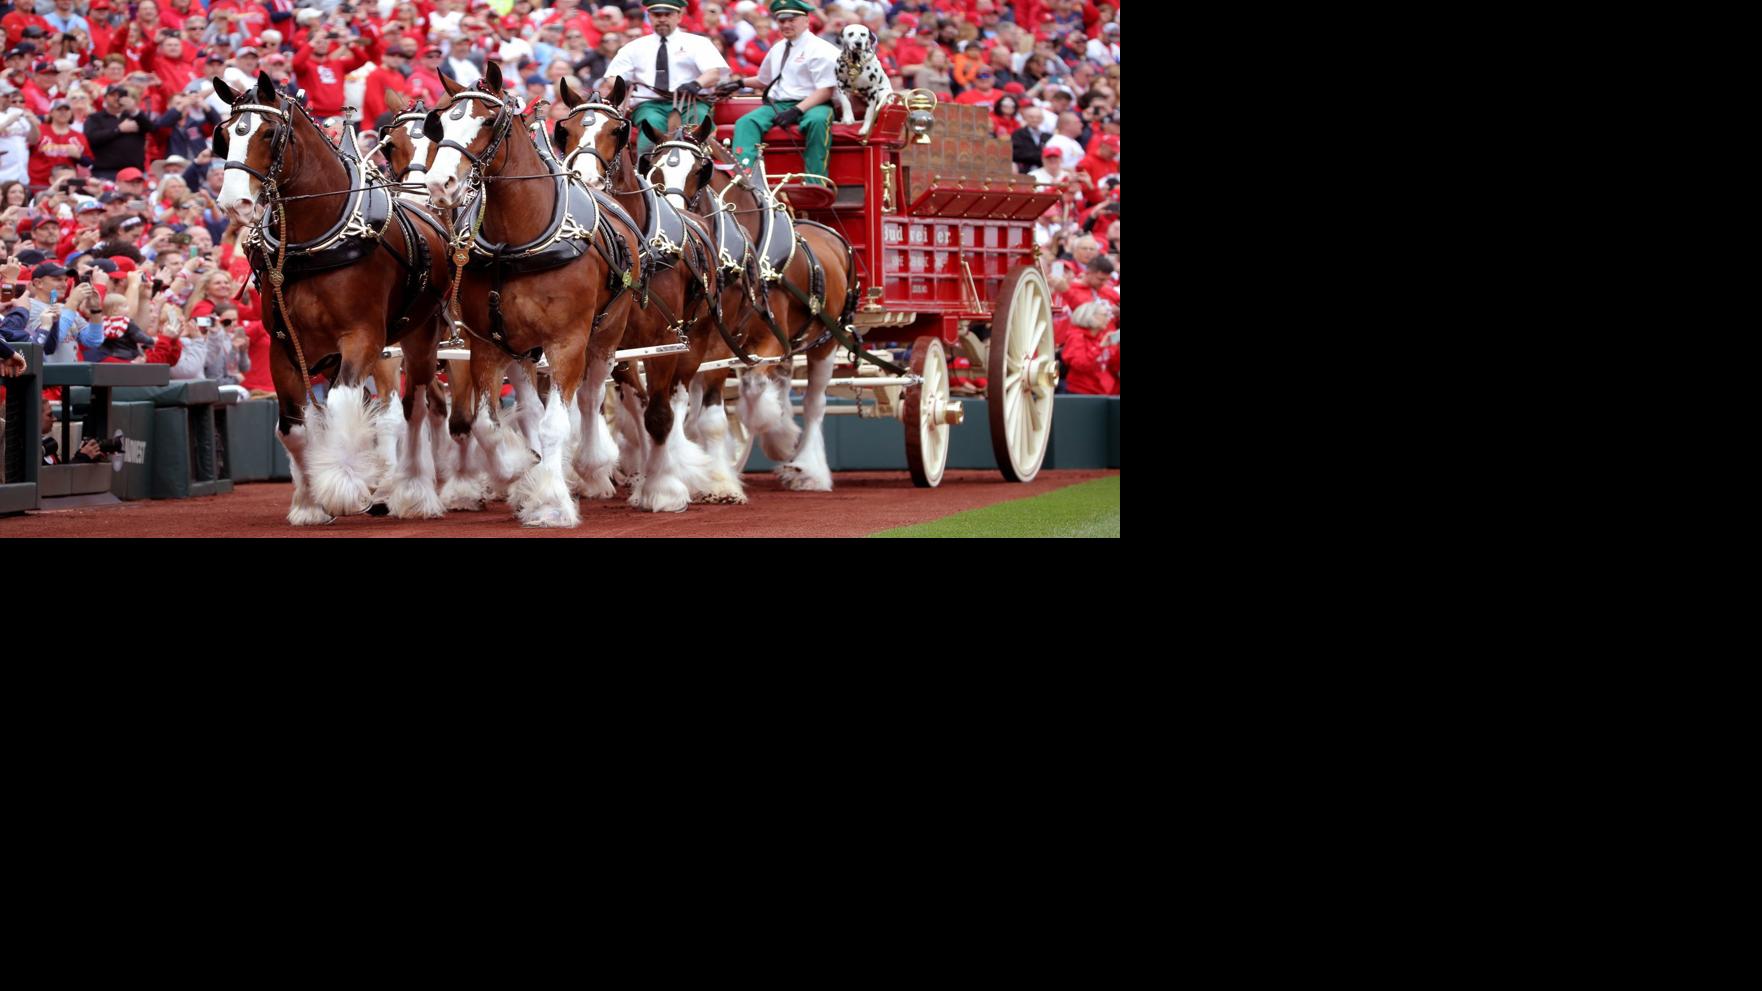 Scenes from 2019 Cardinals opening day | St. Louis Cardinals | www.ermes-unice.fr